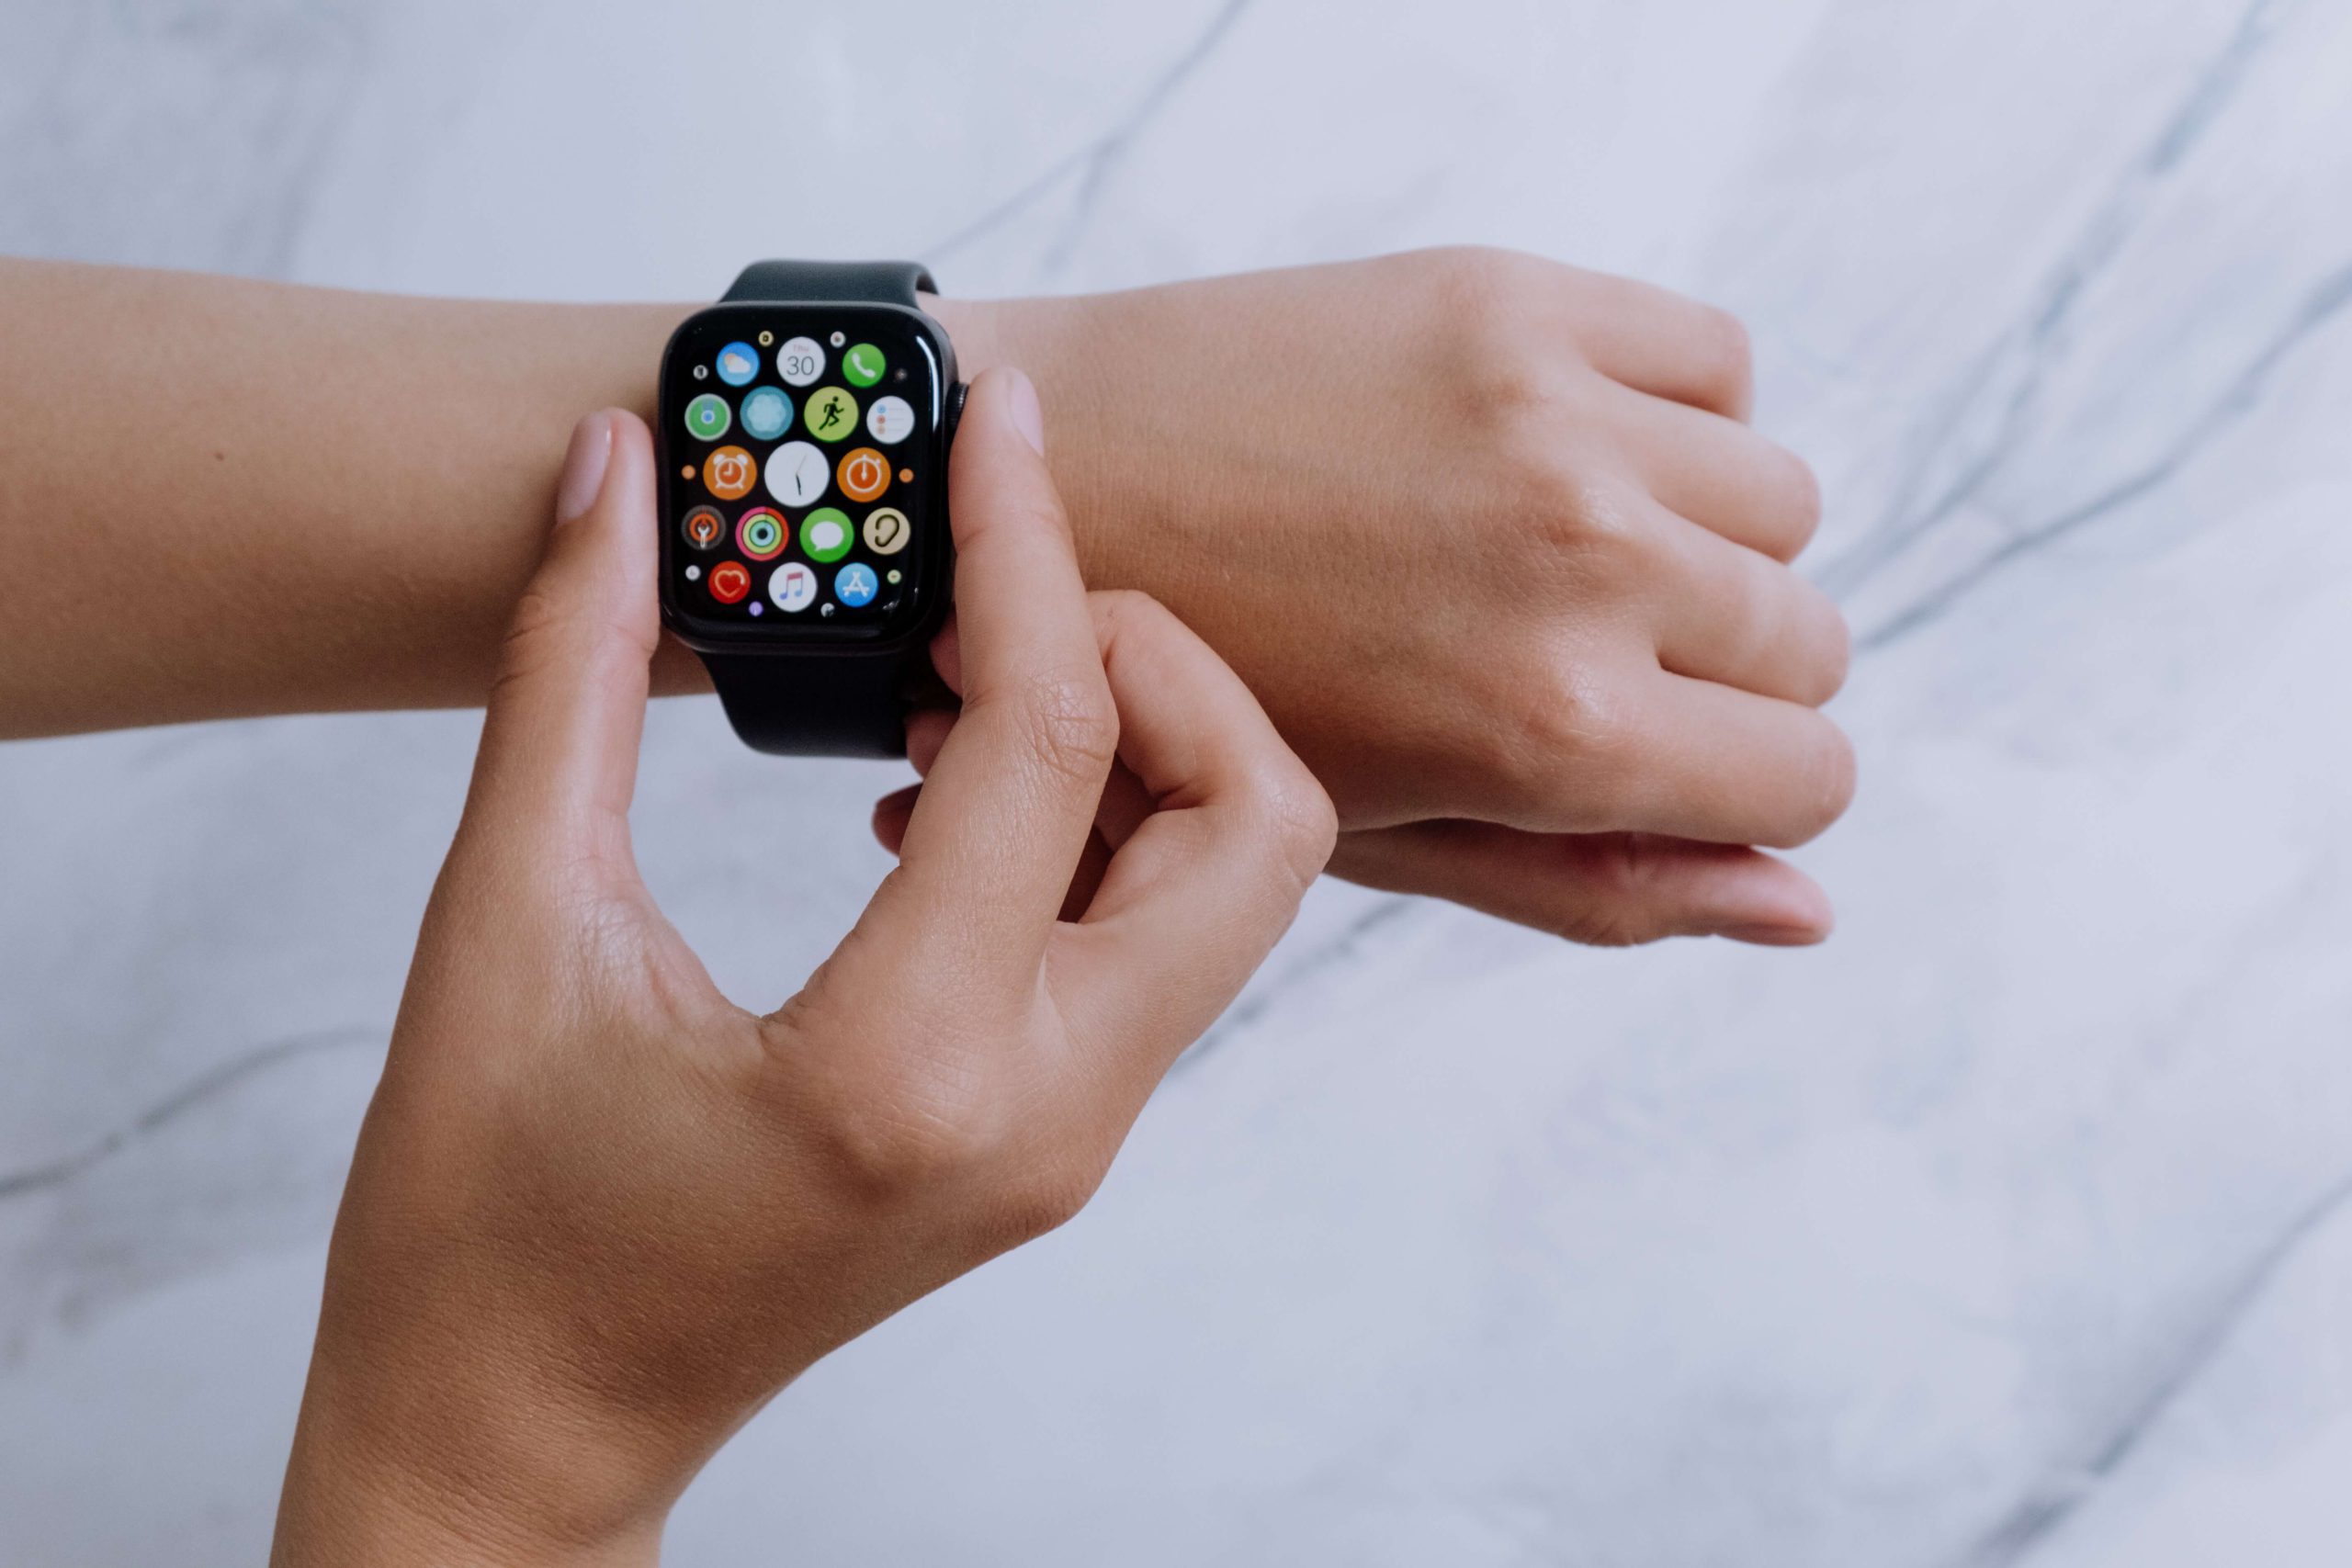 Does apple watch have gps tracking?